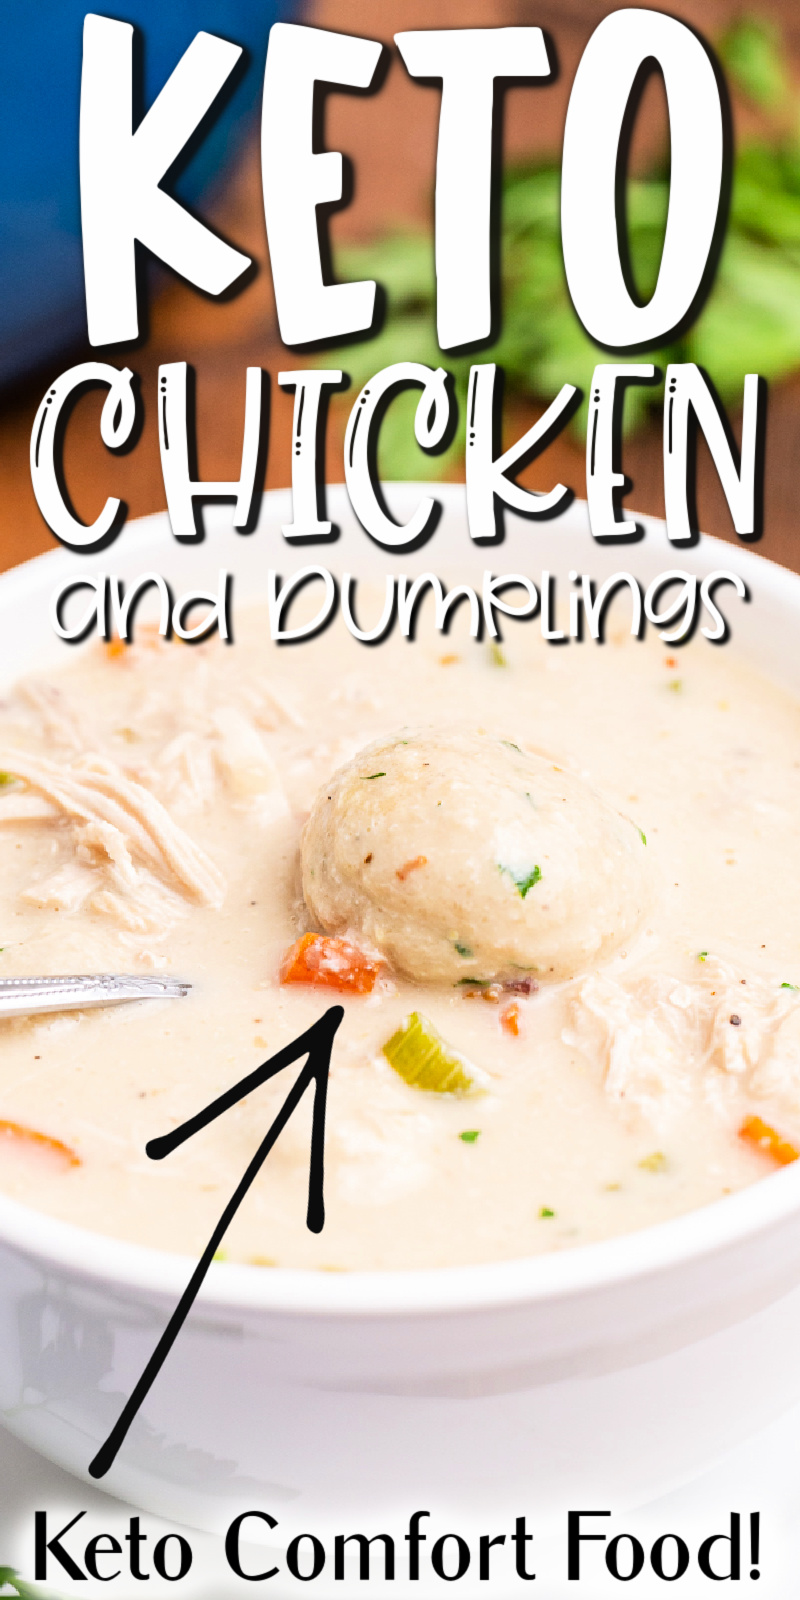 Keto Chicken and Dumplings - This keto chicken and dumplings recipe is the perfect dish when you’re craving comfort food without the carbs. Delicious chicken stew, with low carb almond and coconut flour dumplings, it is pure comfort in a bowl! #keto #lowcarb #glutenfree #chicken #dumplings #recipe